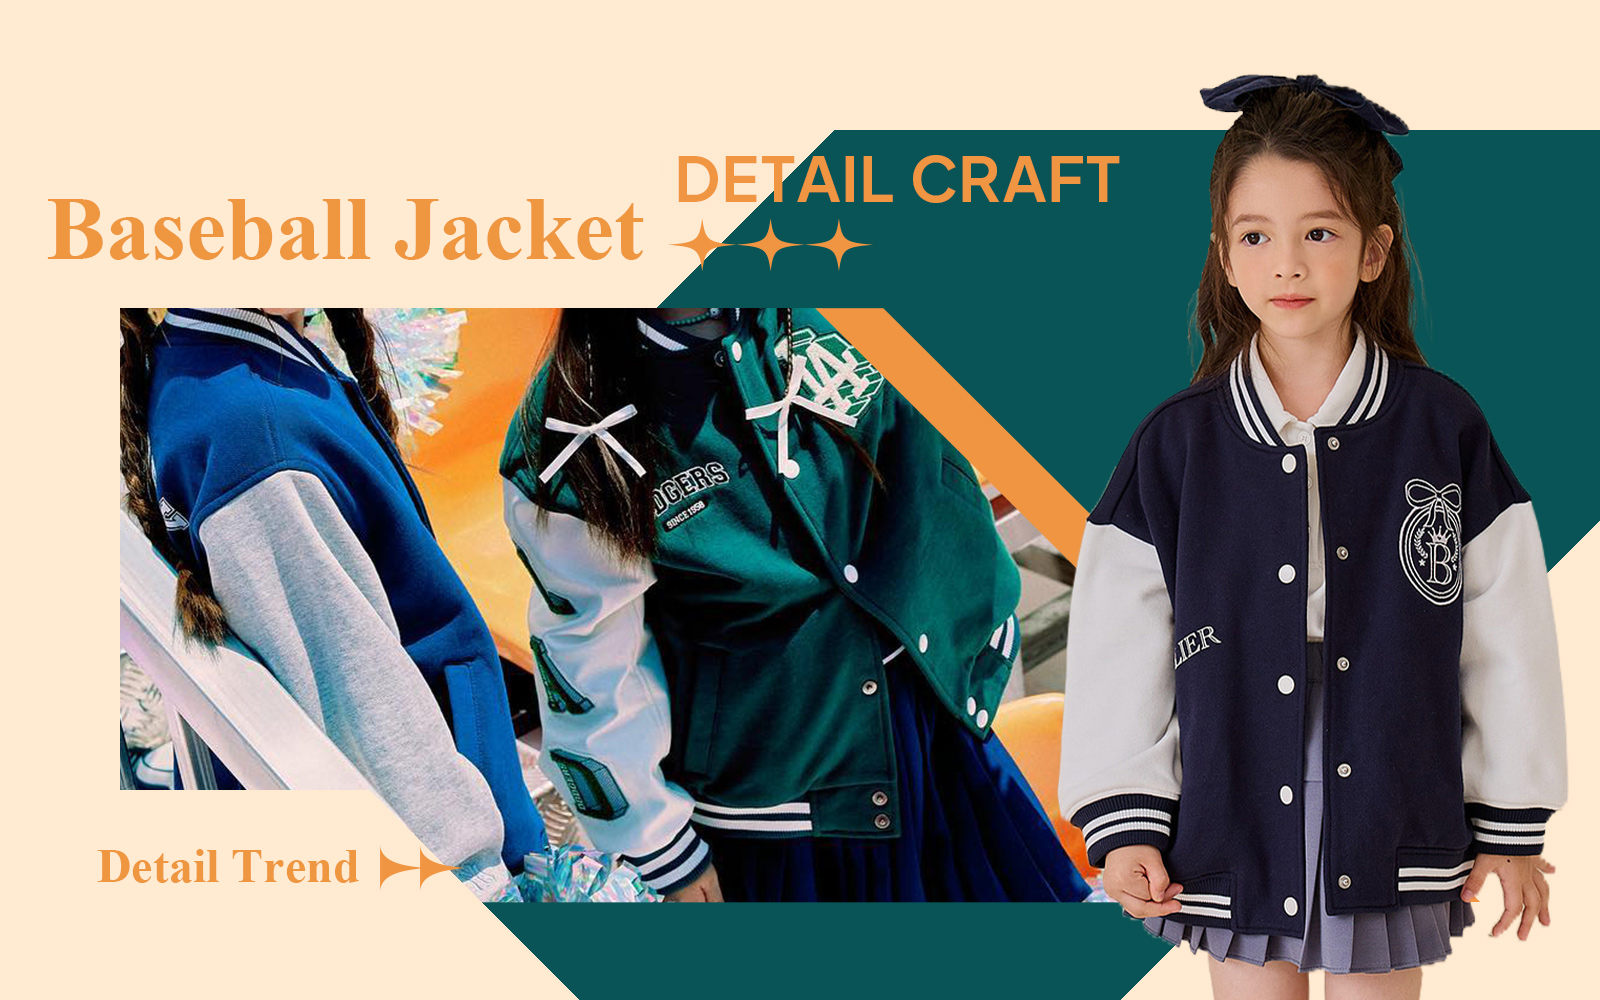 The Detail & Craft Trend for Kids' Baseball Jacket